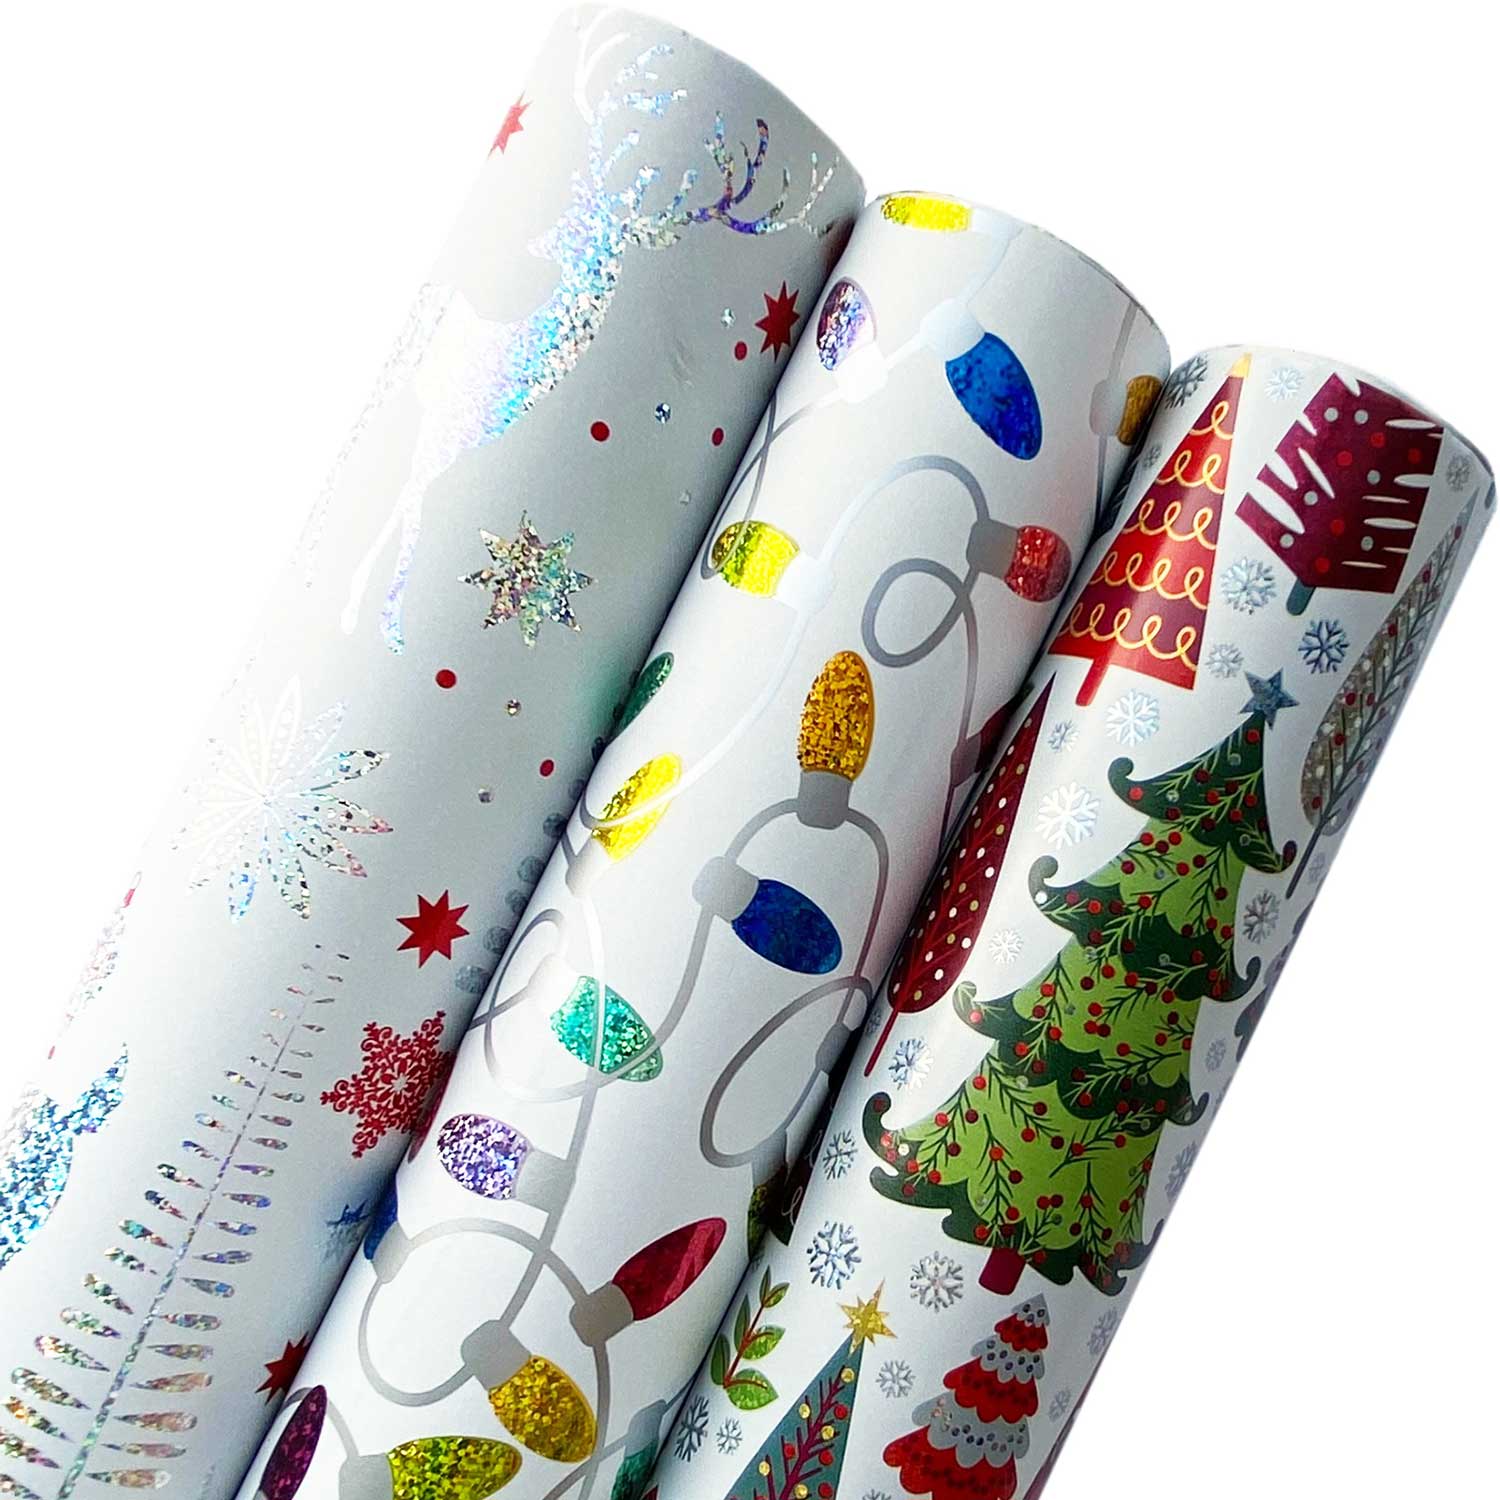 Holographic Christmas Wrapping Paper Roll Bundle